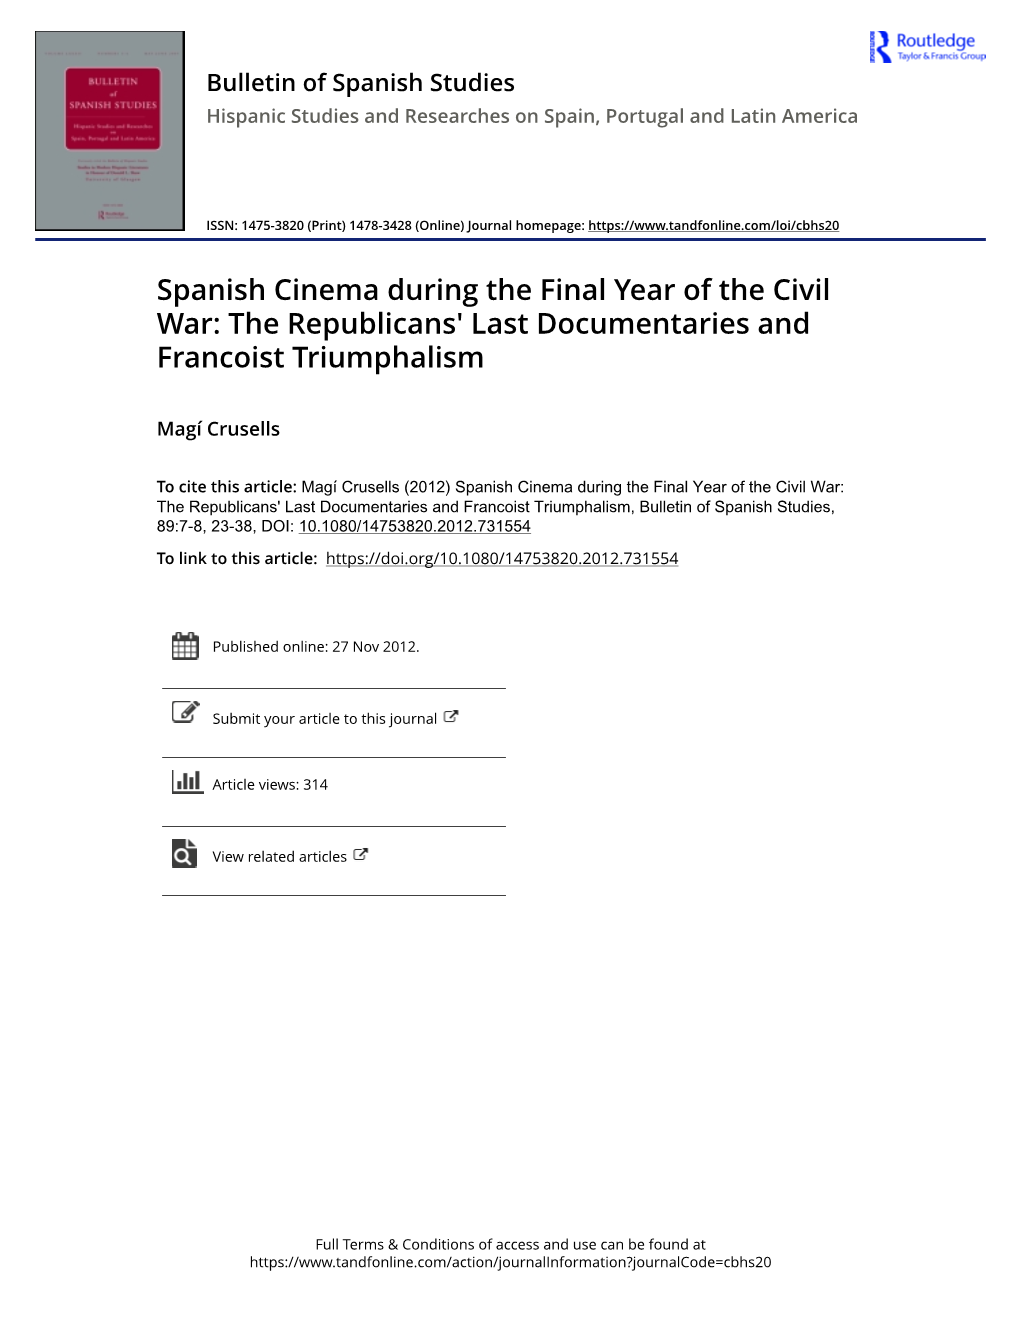 Spanish Cinema During the Final Year of the Civil War: the Republicans' Last Documentaries and Francoist Triumphalism